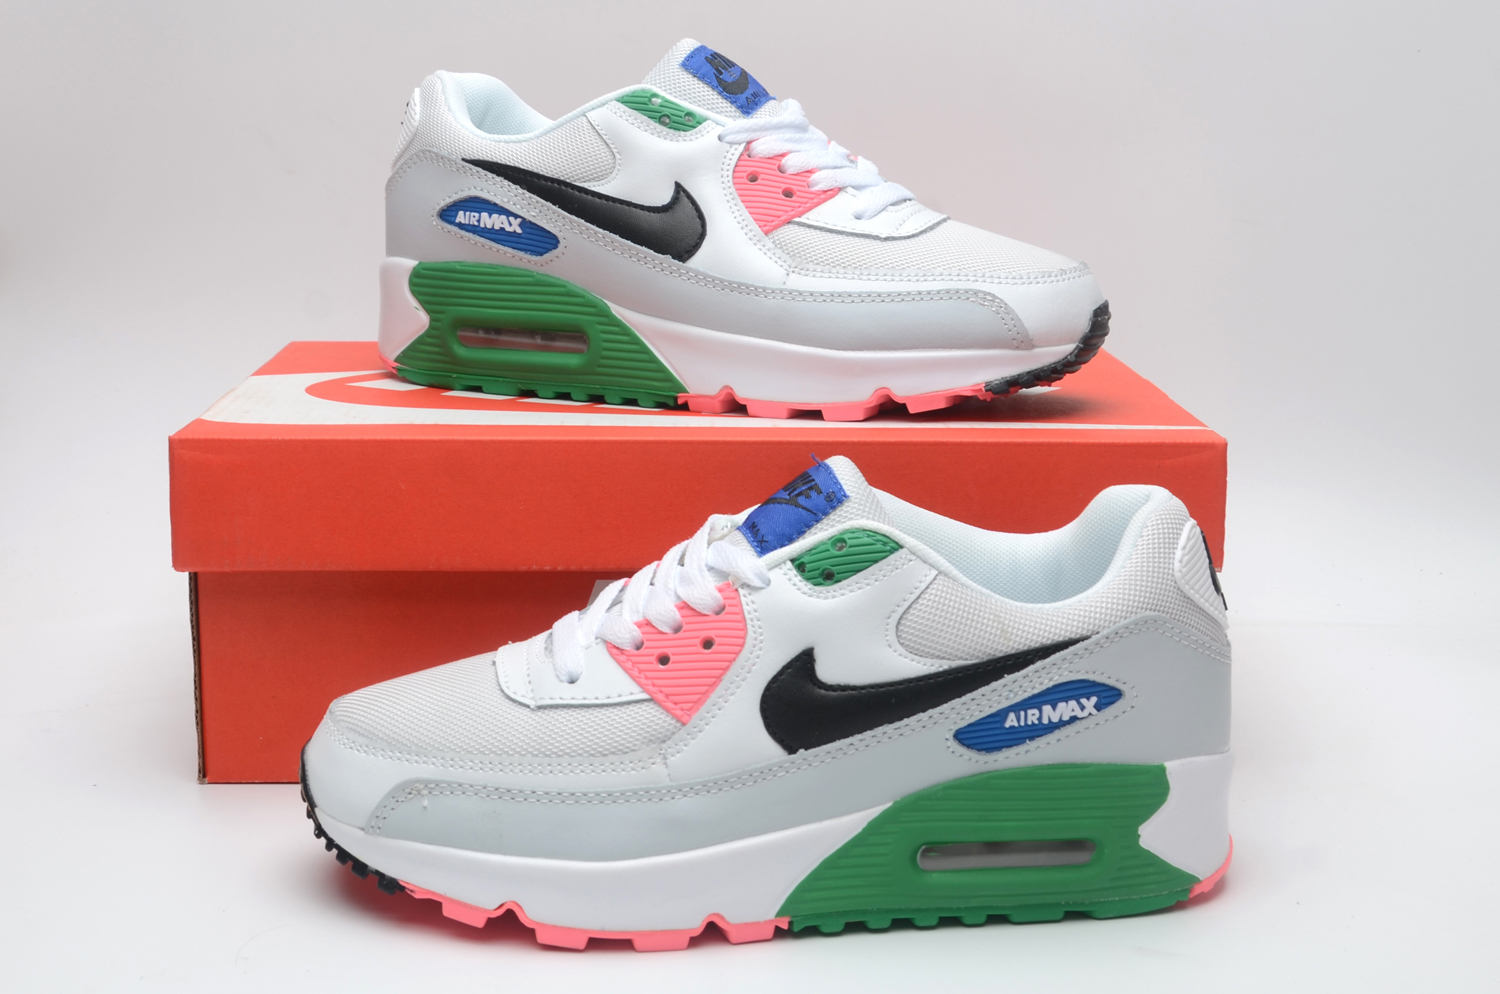 Women's Running weapon Air Max 90 Shoes 038